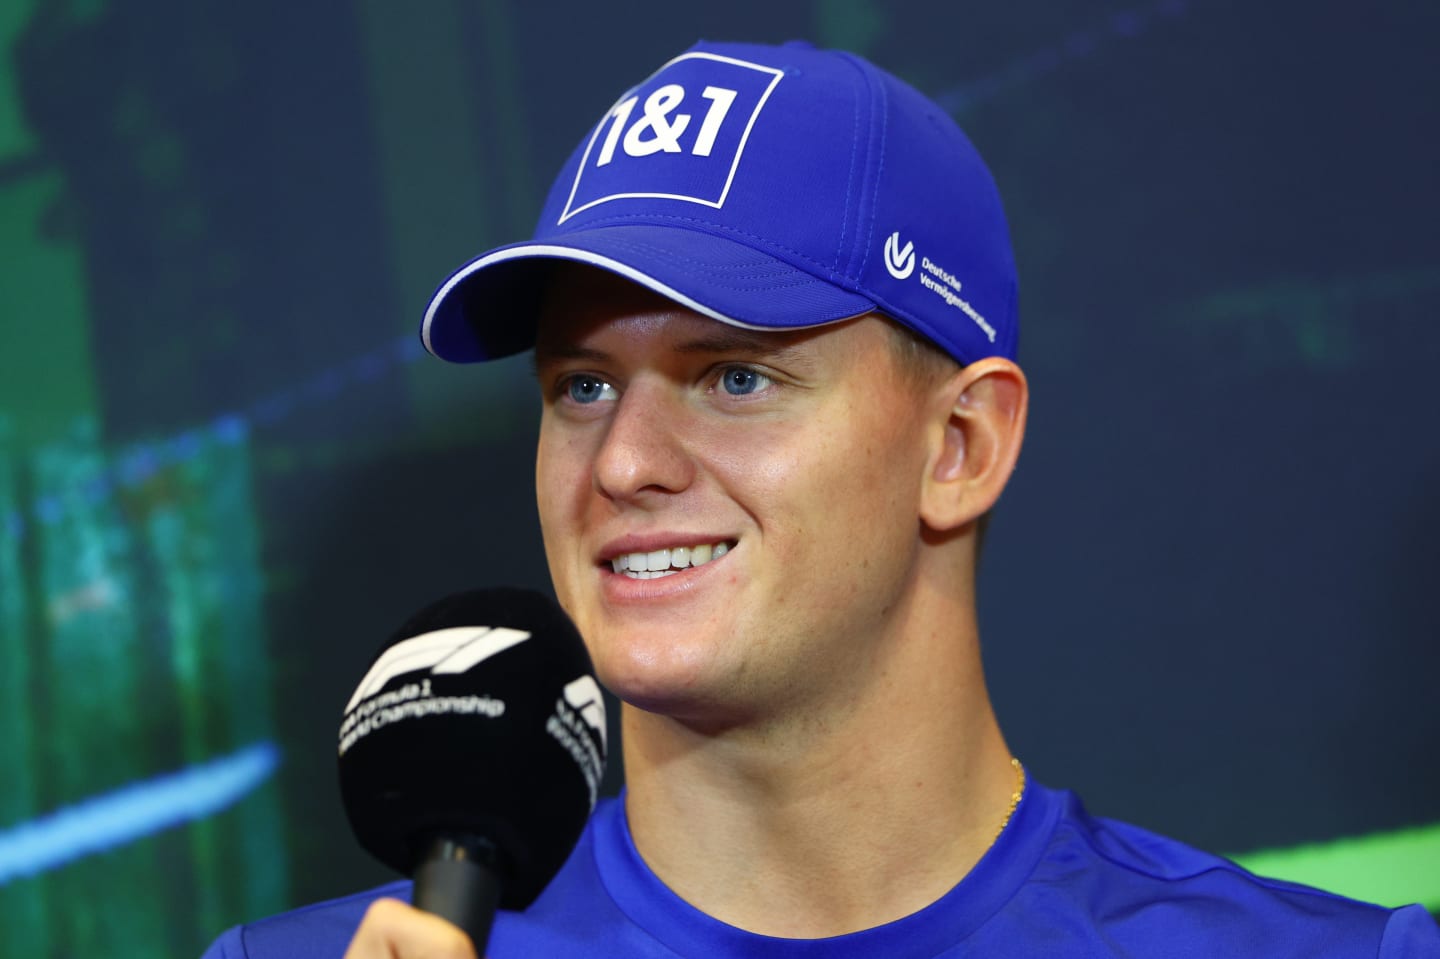 BAKU, AZERBAIJAN - JUNE 10: Mick Schumacher of Germany and Haas F1 talks in the Drivers Press Conference prior to practice ahead of the F1 Grand Prix of Azerbaijan at Baku City Circuit on June 10, 2022 in Baku, Azerbaijan. (Photo by Clive Rose/Getty Images)